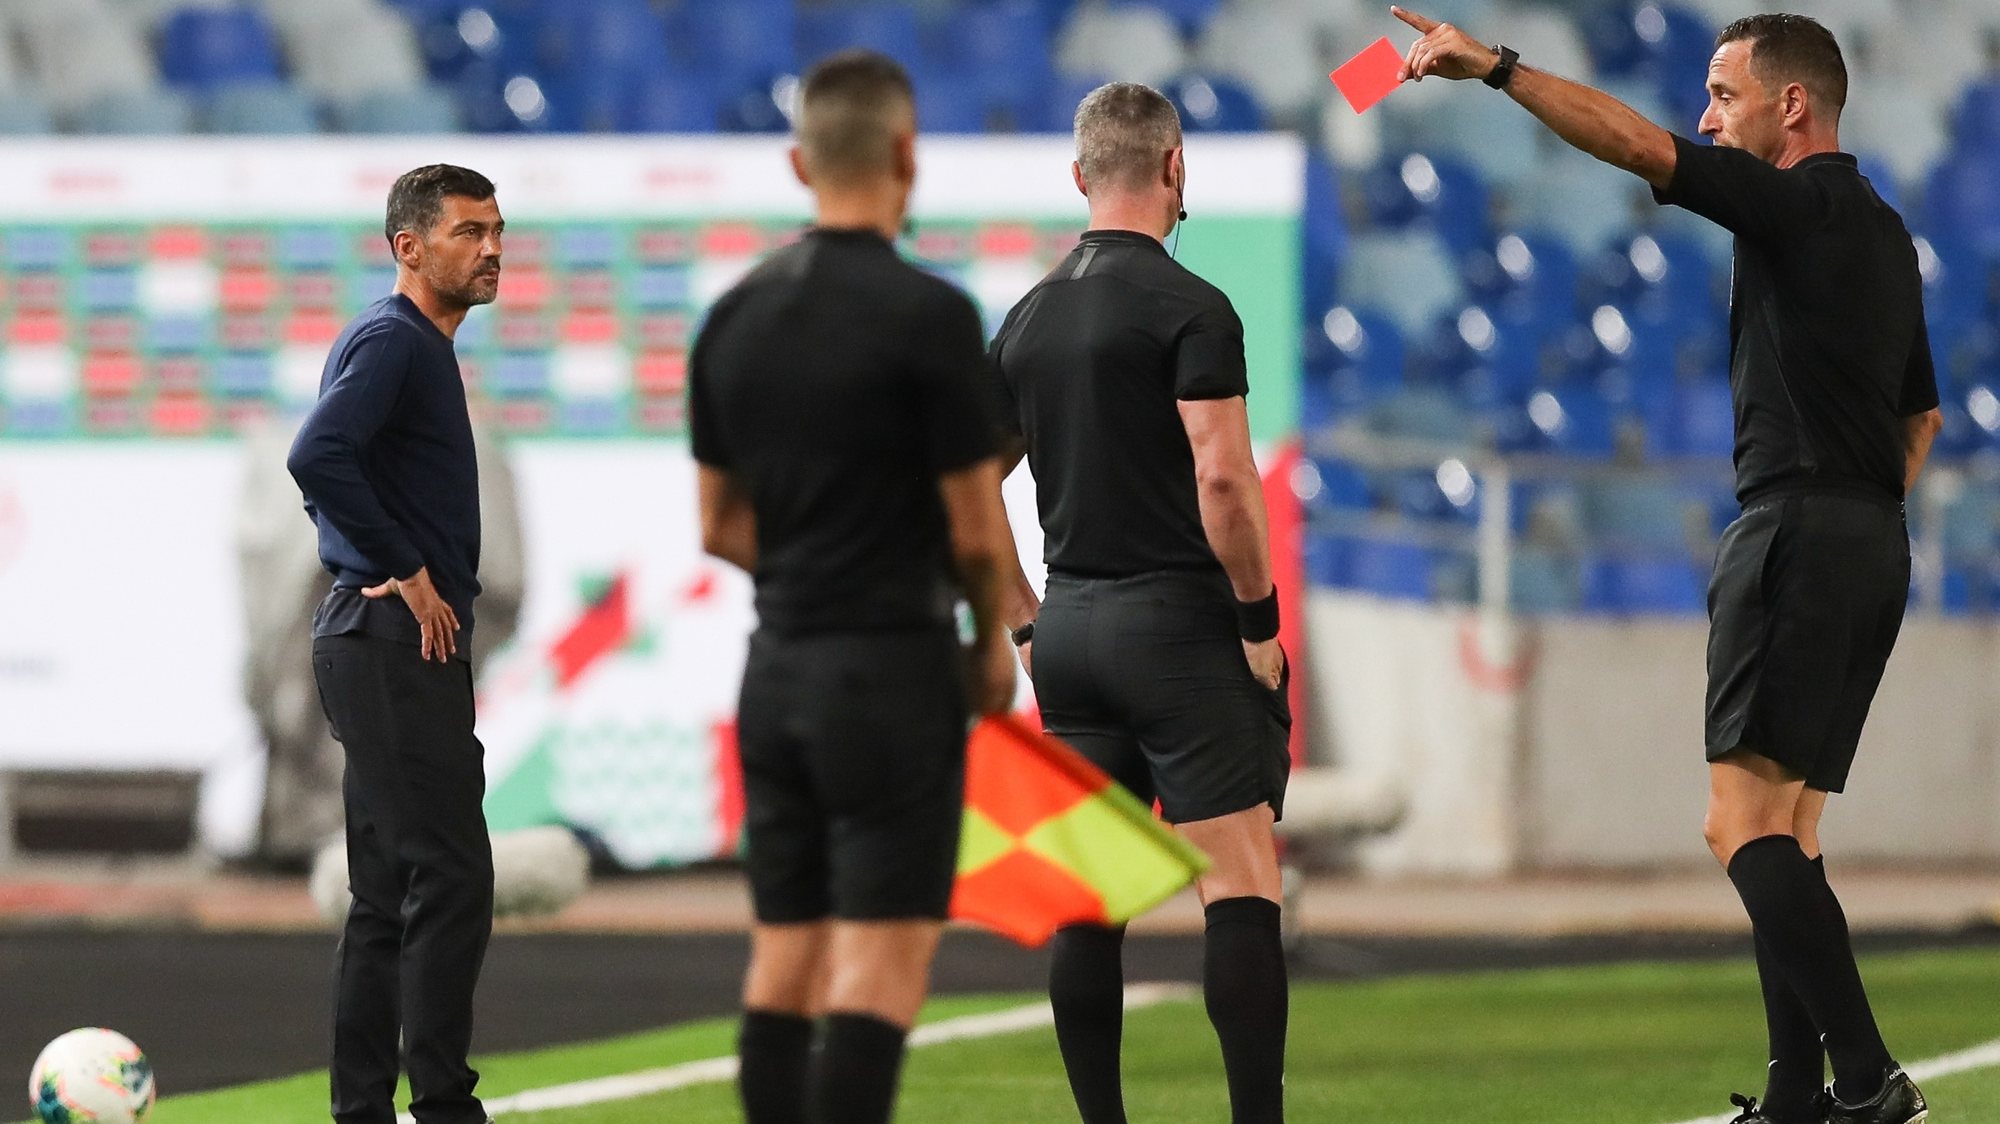 epa08579848 The referee Artur Soares Dias (R) shows a red card to FC Porto&#039;s head-coach Sergio Conceicao (L) during the Portuguese Cup final soccer match between Benfica and FC Porto, held at Coimbra City stadium, Coimbra, Portugal, 1st August 2020.  EPA/JOSE COELHO